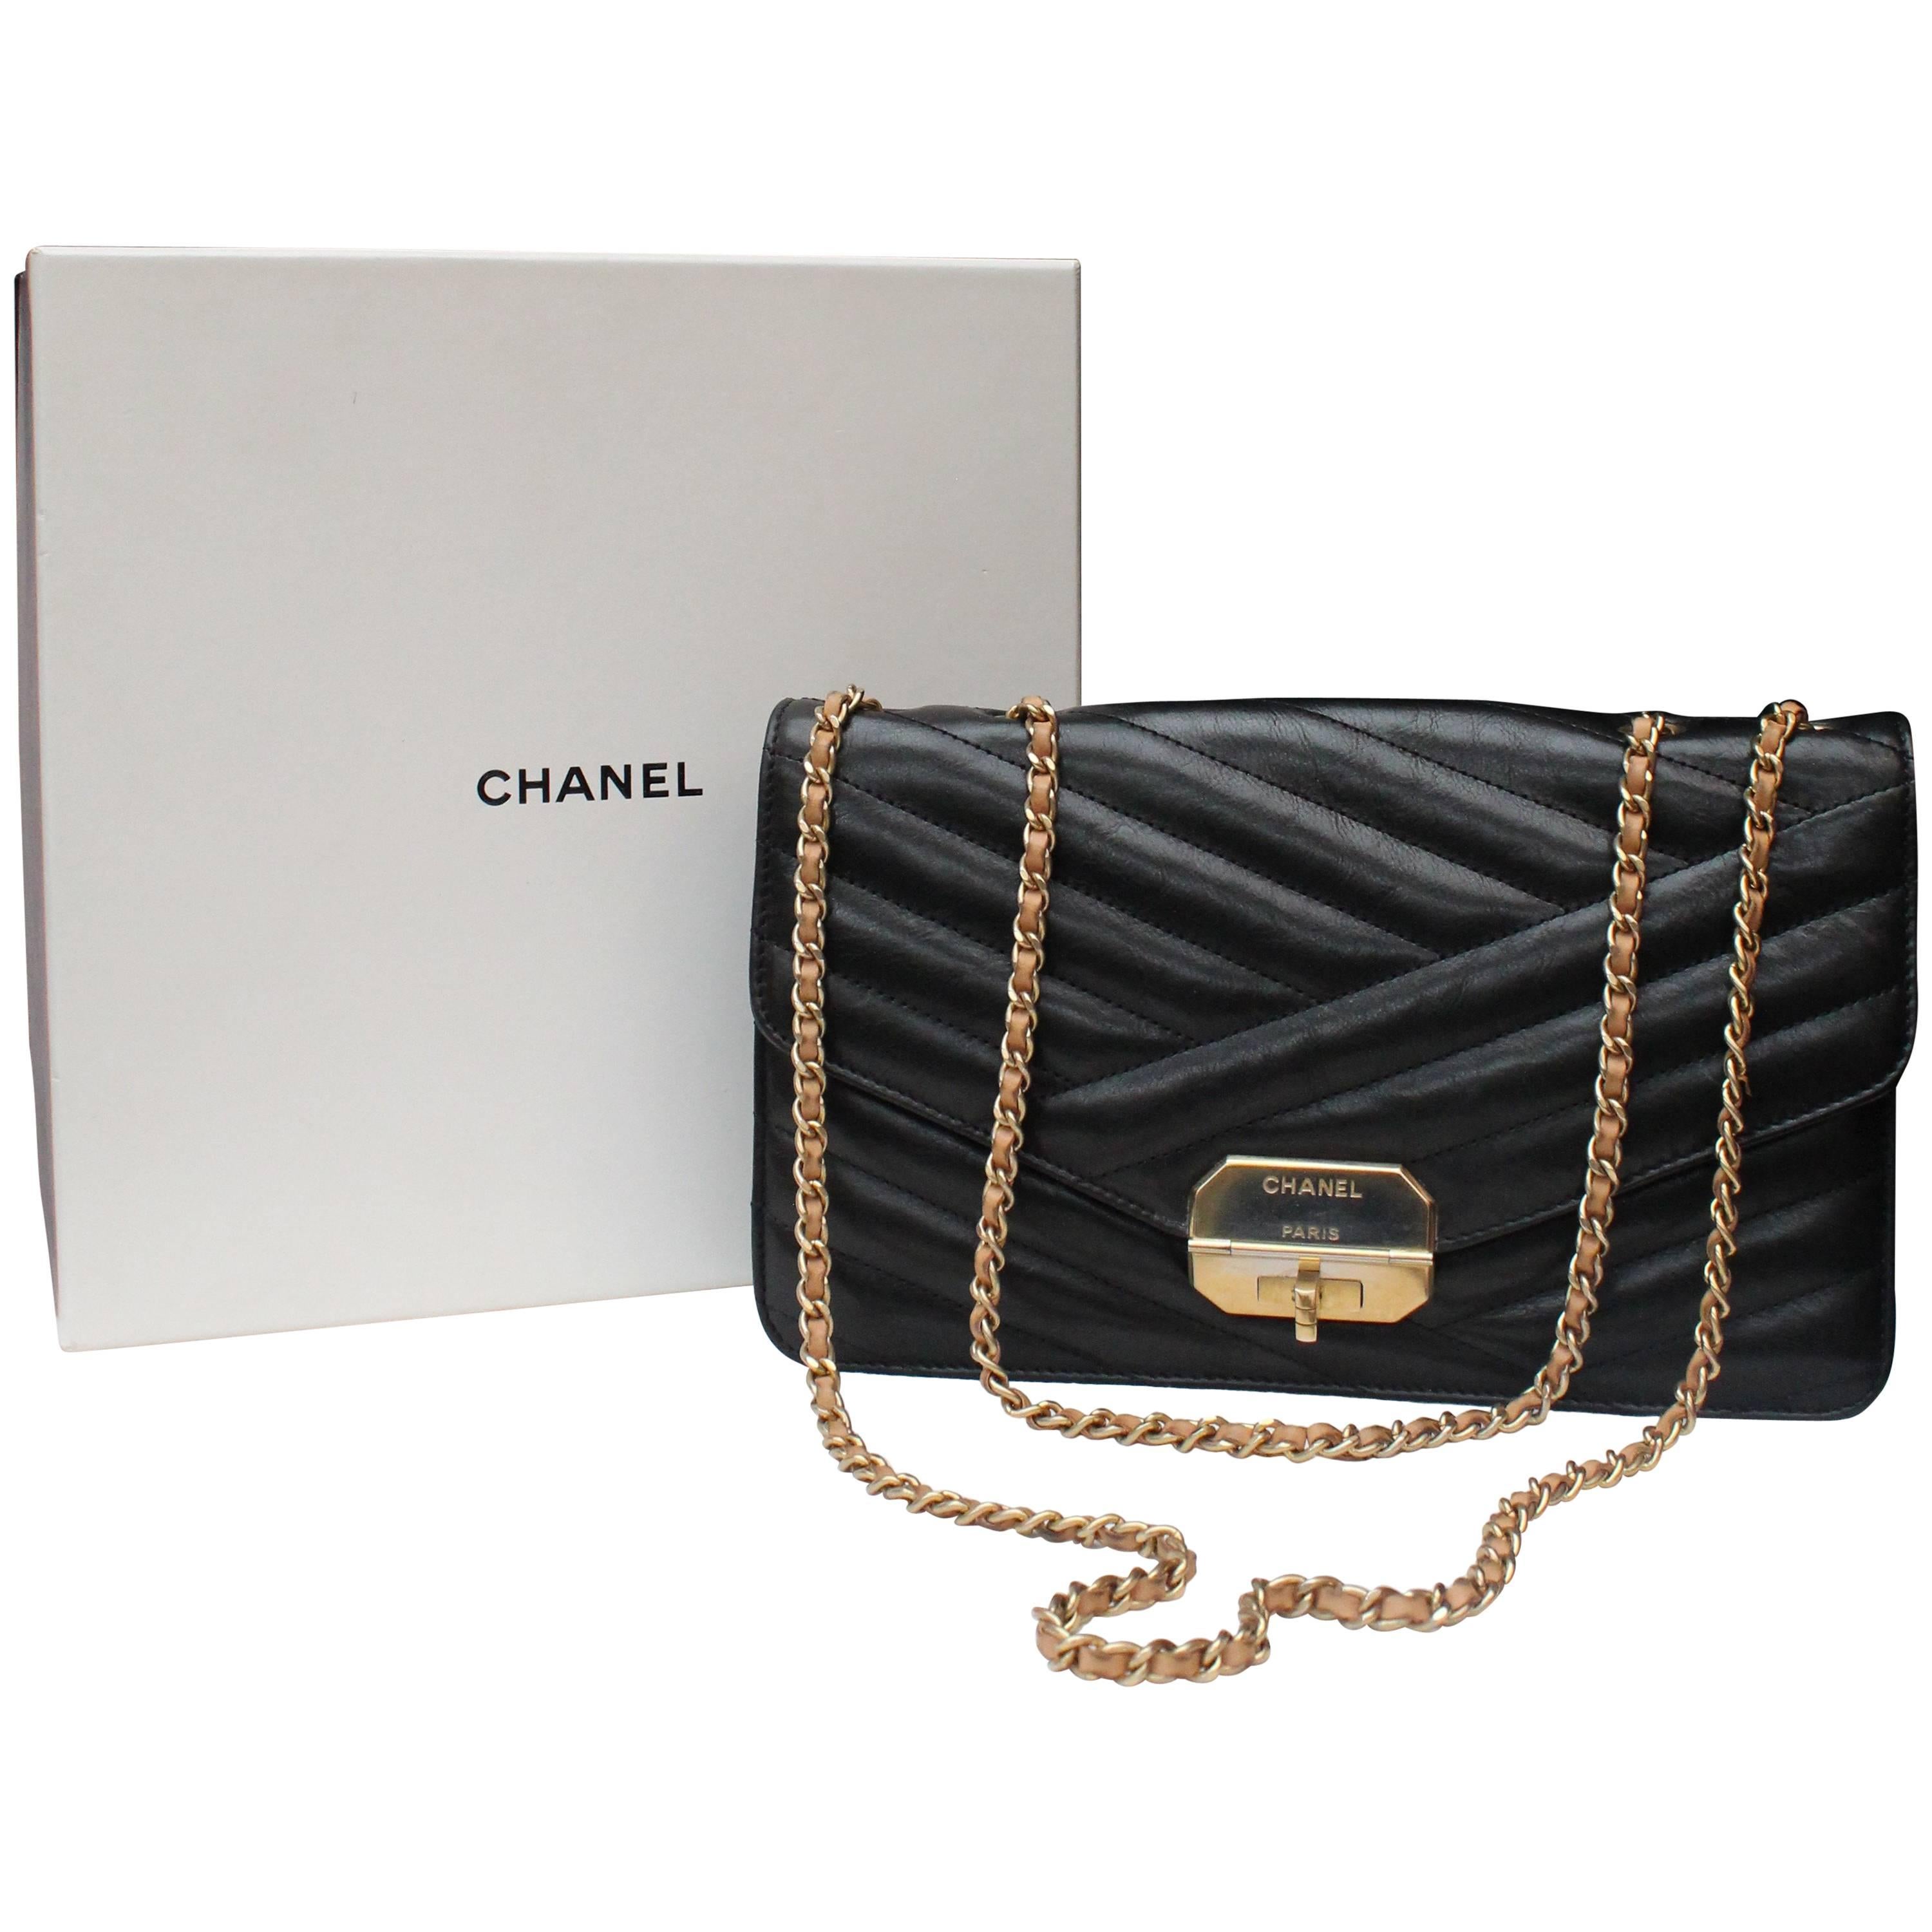 Chanel quilted black leather bag